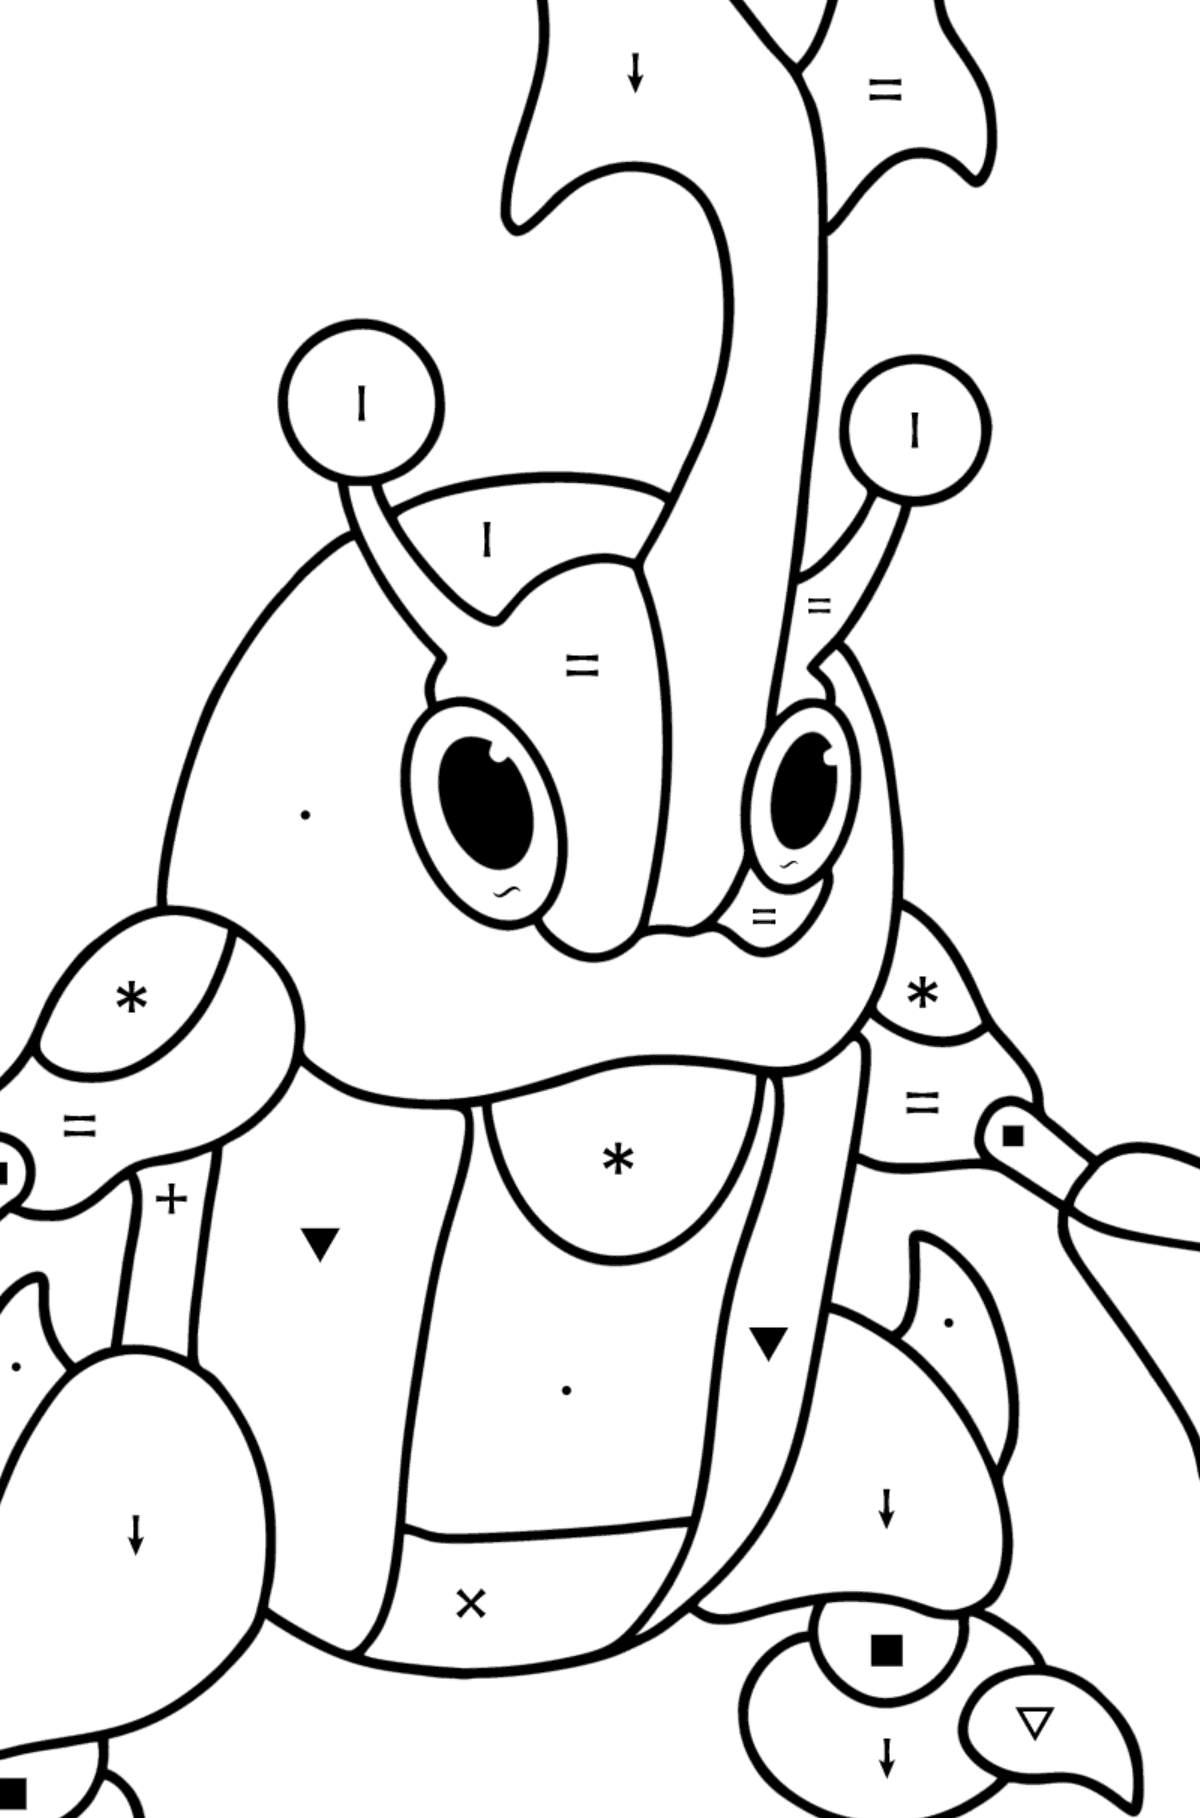 Colouring page Pokémon X and Y Heracross - Coloring by Symbols for Kids